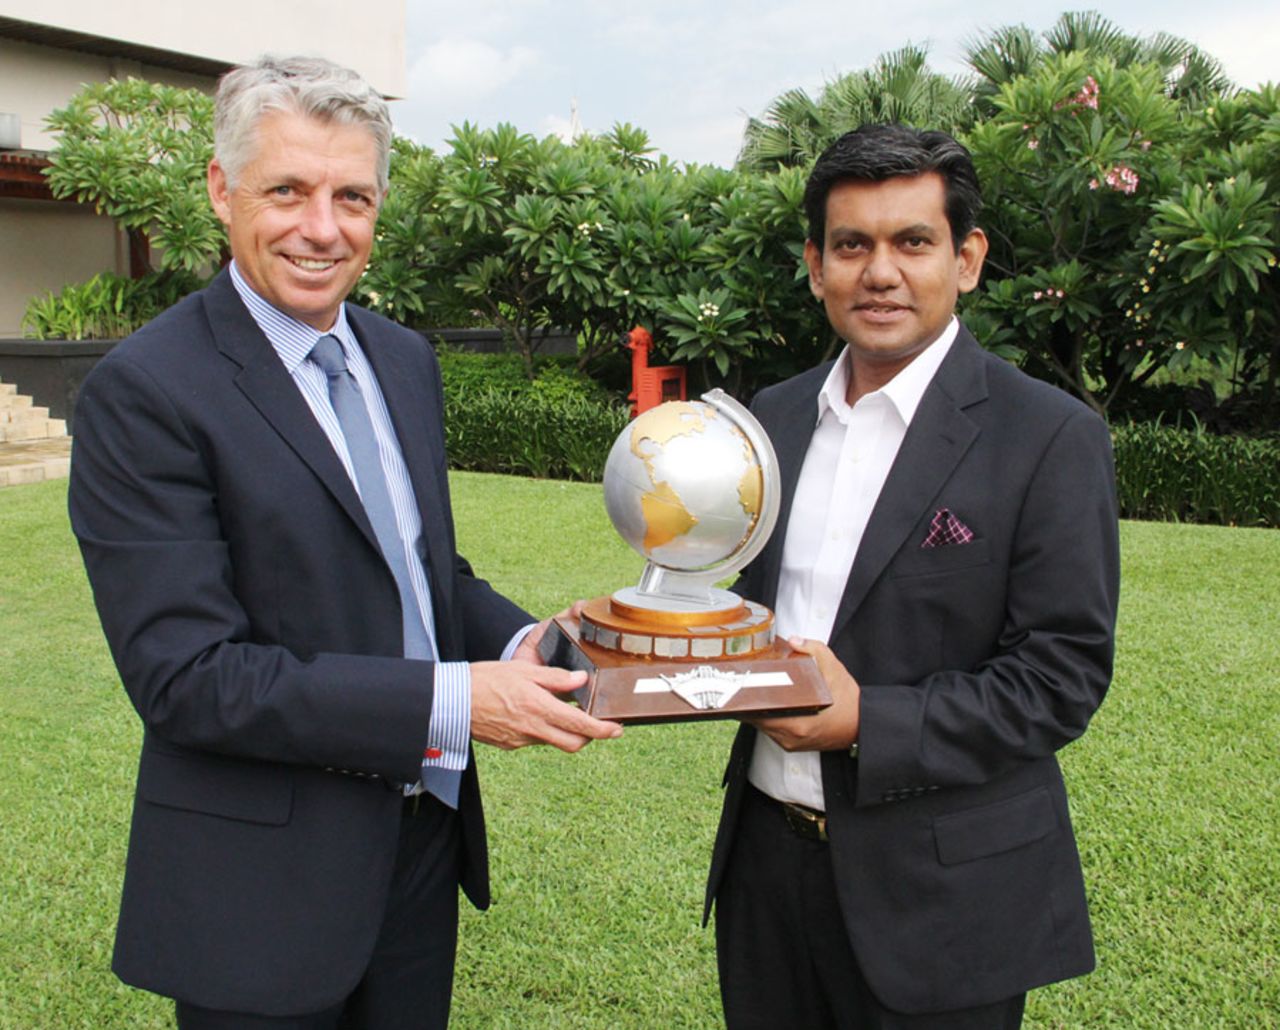 ICC CEO David Richardson hands over a replica of the 1997 ICC trophy to the BCB acting CEO Nizam Uddin Chowdhury, Dhaka, August 13, 2013